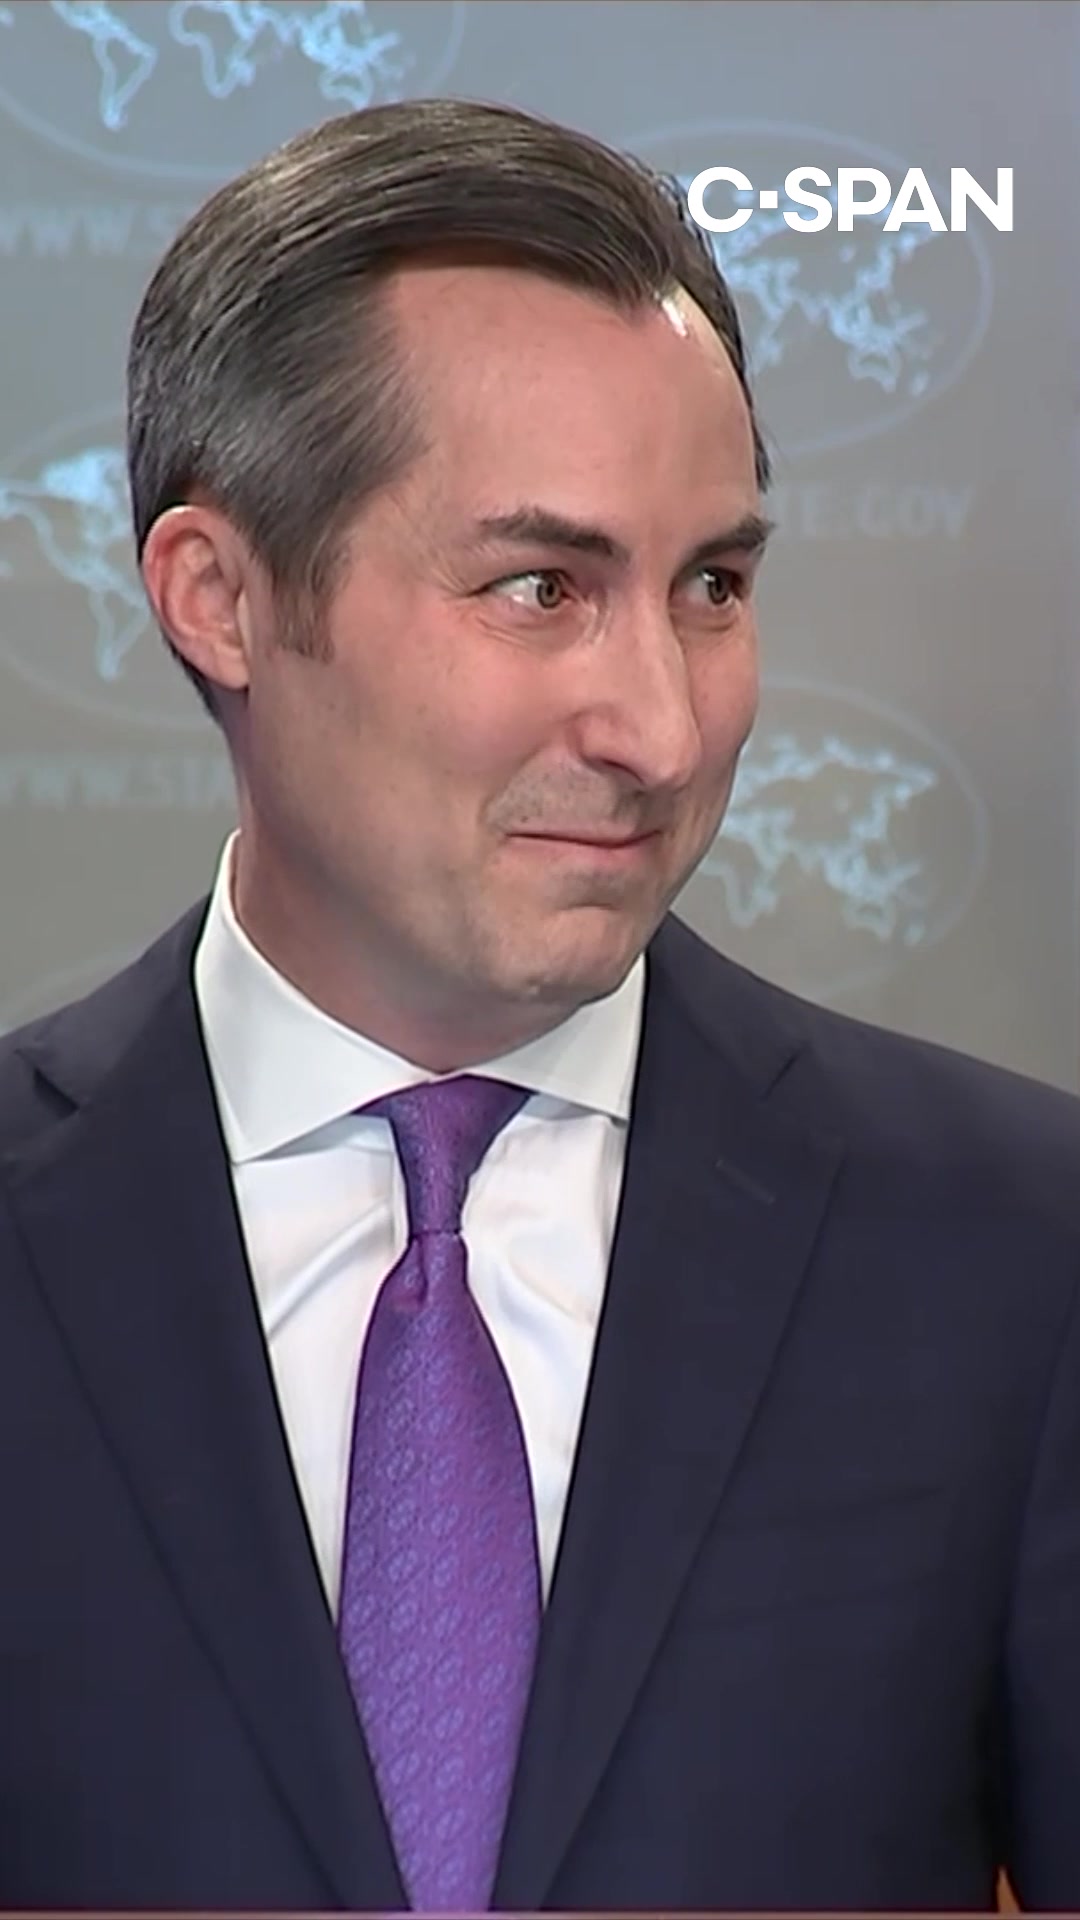 “I hate to interrupt. There’s a big cockroach on the wall over your head.”   State Department spokesman Matthew Miller discovered an unwelcome guest at the State Department briefing on Thursday.   #statedepartment #cockroach #roach #cspan